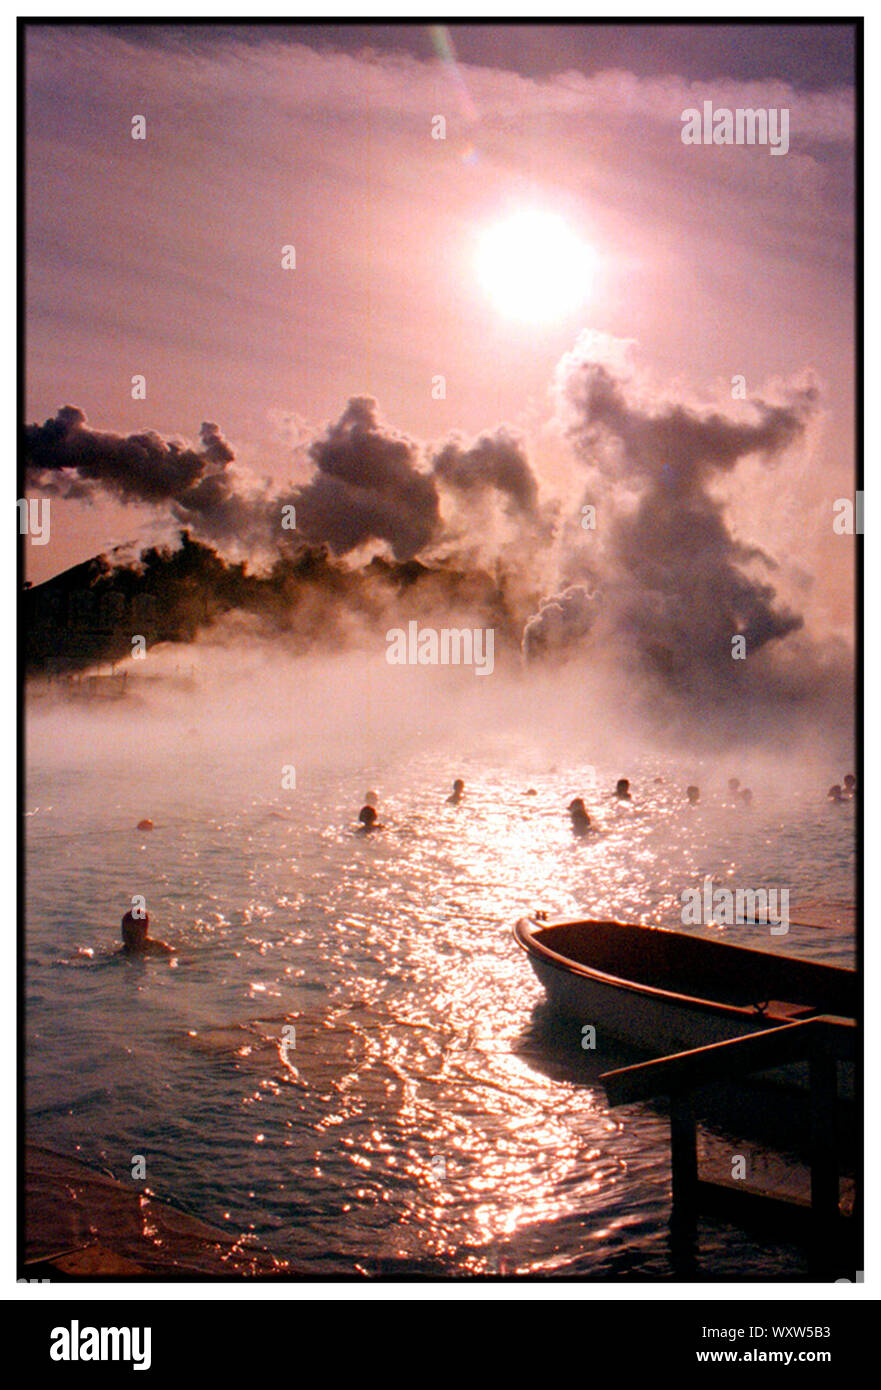 The Blue Lagoon. The geothermal spa is heated by water from the nearby Svartsengi geothermal power plant. The silt in the pool is silica, and is rubbed on the skin by bathers. Stock Photo